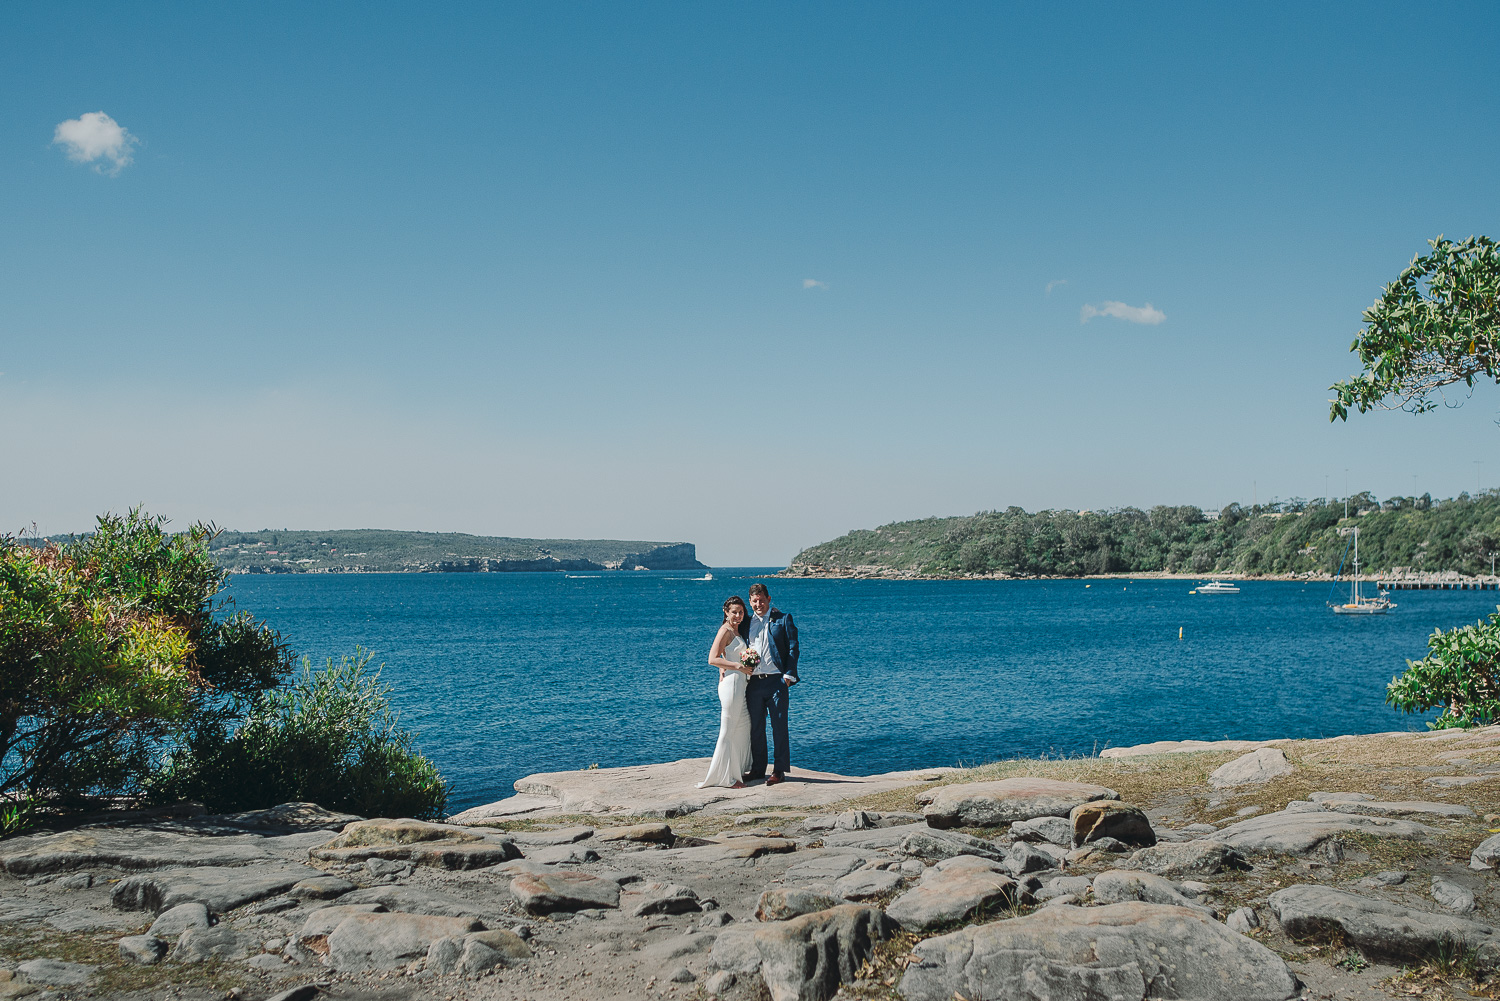 Hsban-and-wife-wedding-photo-in-balmoral-Beach-sydney-harbour-view-photo